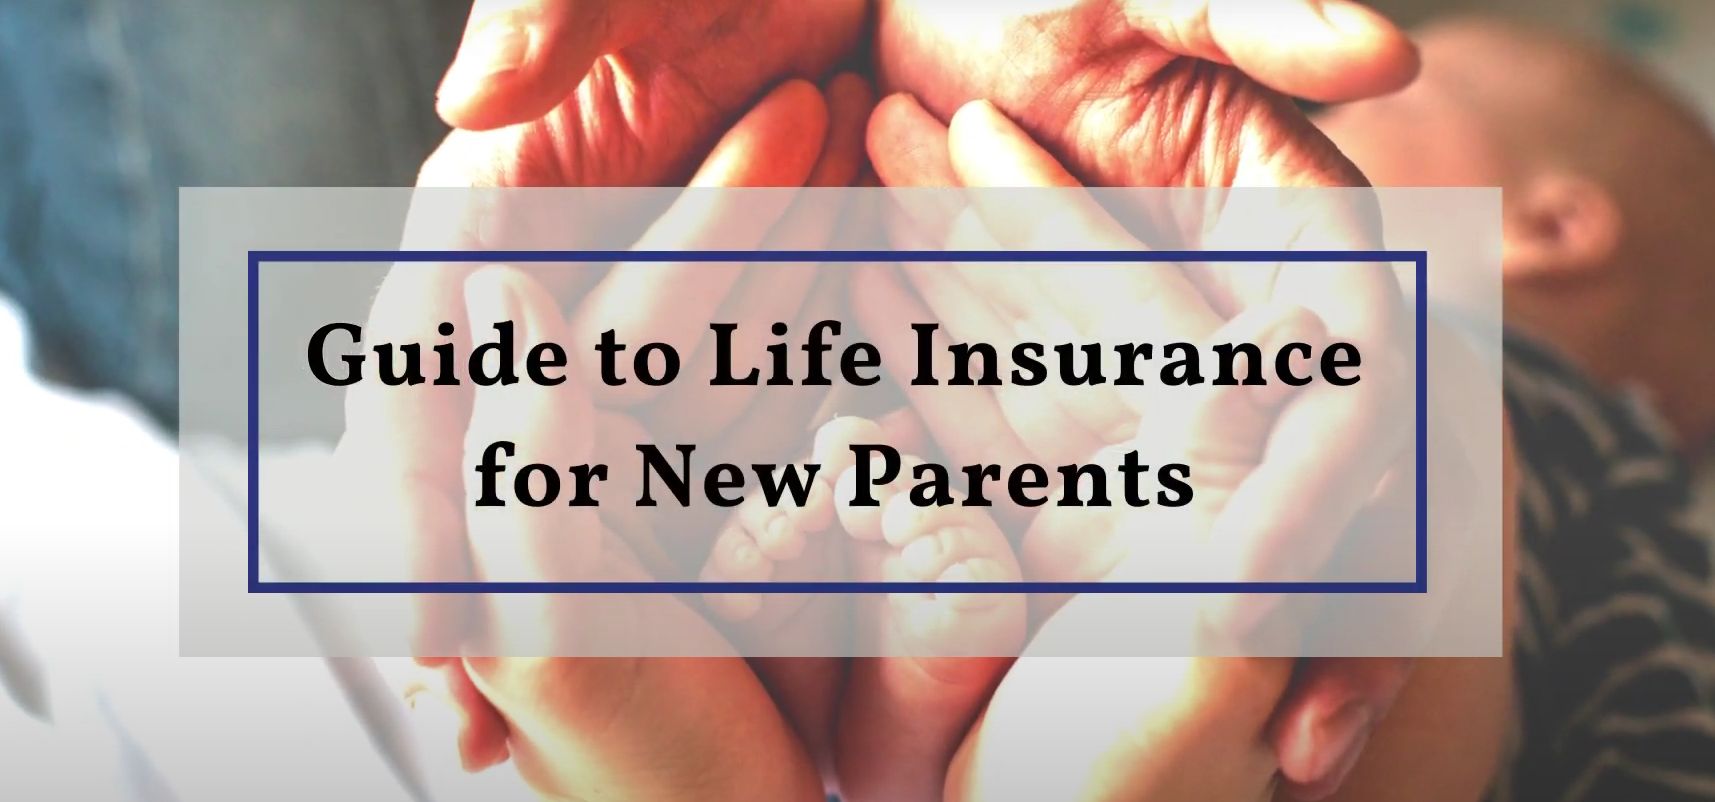 Guide to Life Insurance for New Parents Life Insurance Plans in India - HDFC Sales